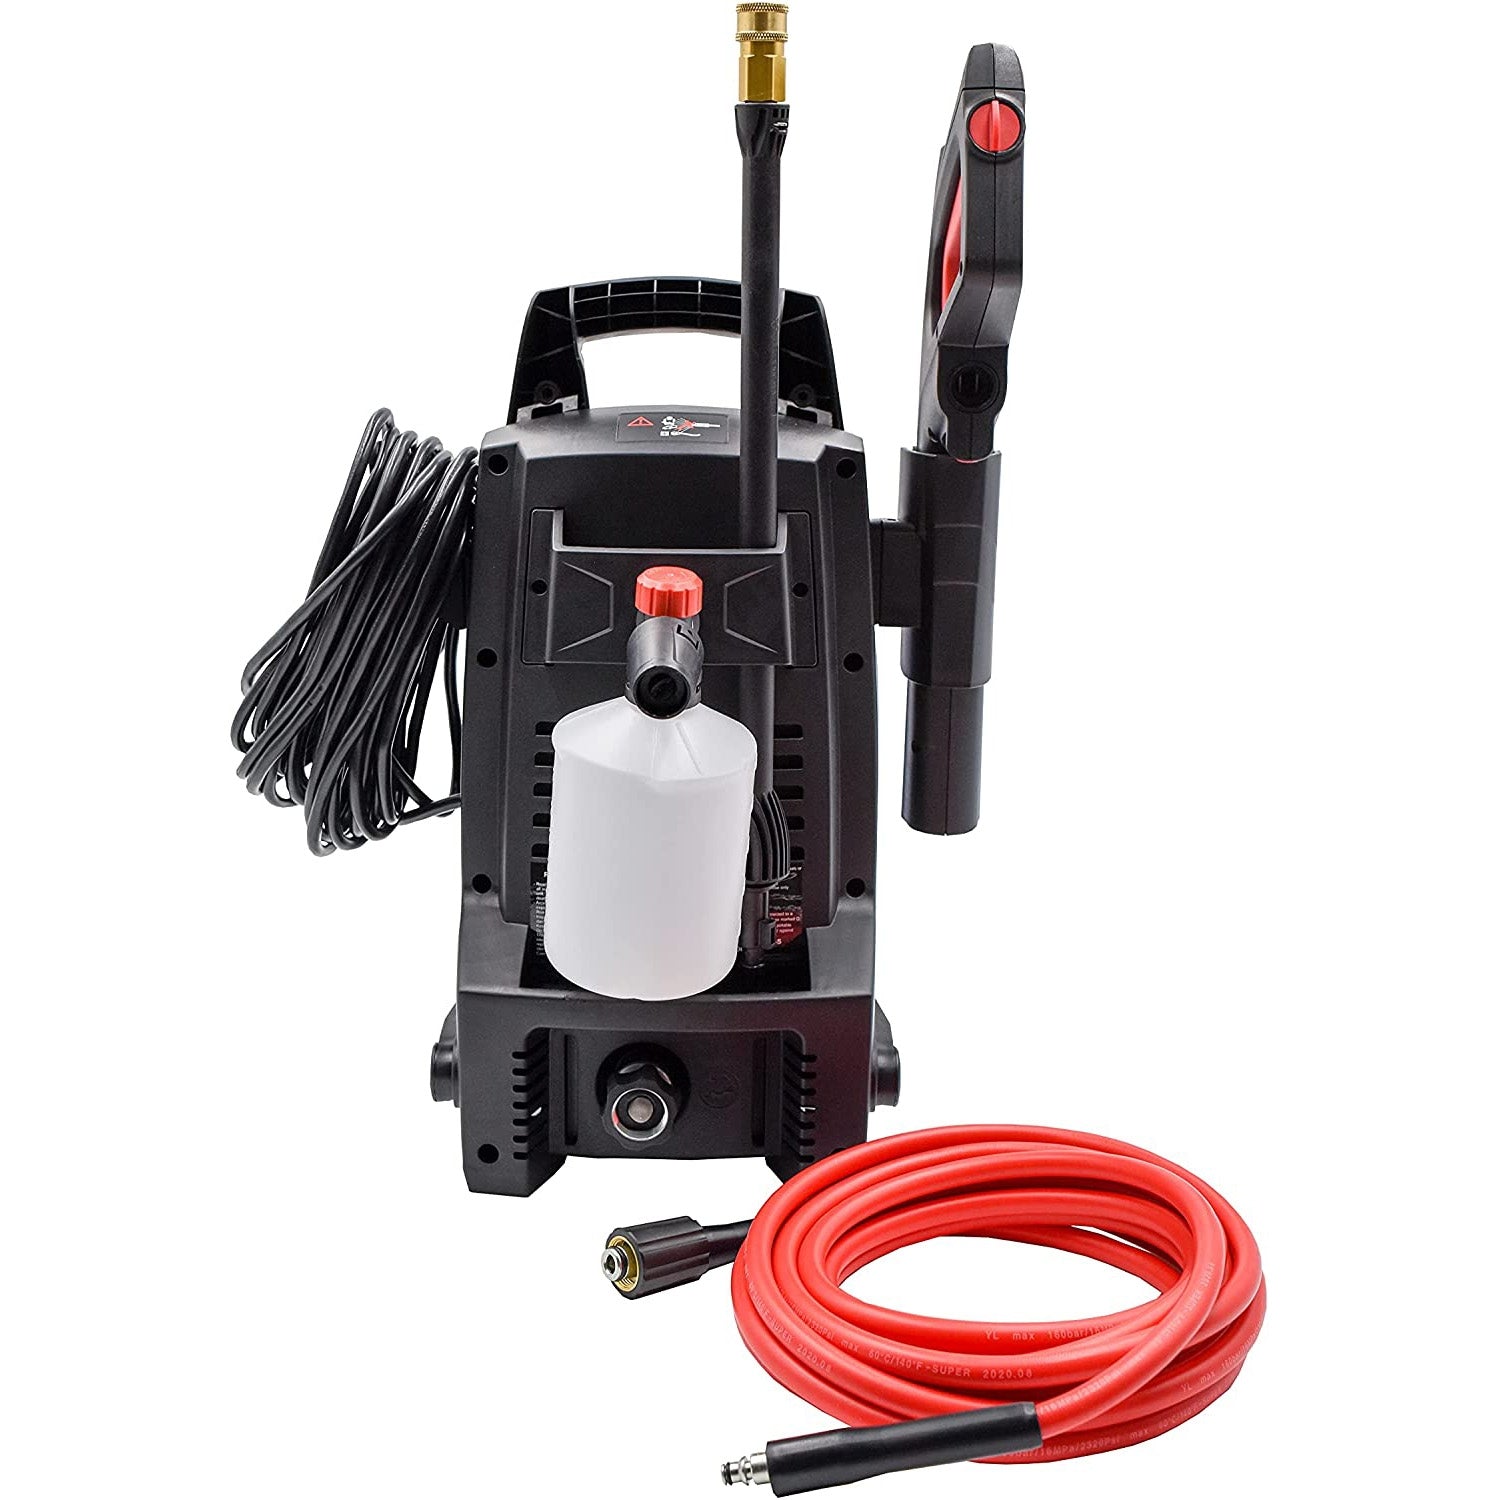 AR Blue Clean BC111HS 600 PSI 1.7 GPM 12.5 Amp Electric Super Compact Pressure Washer